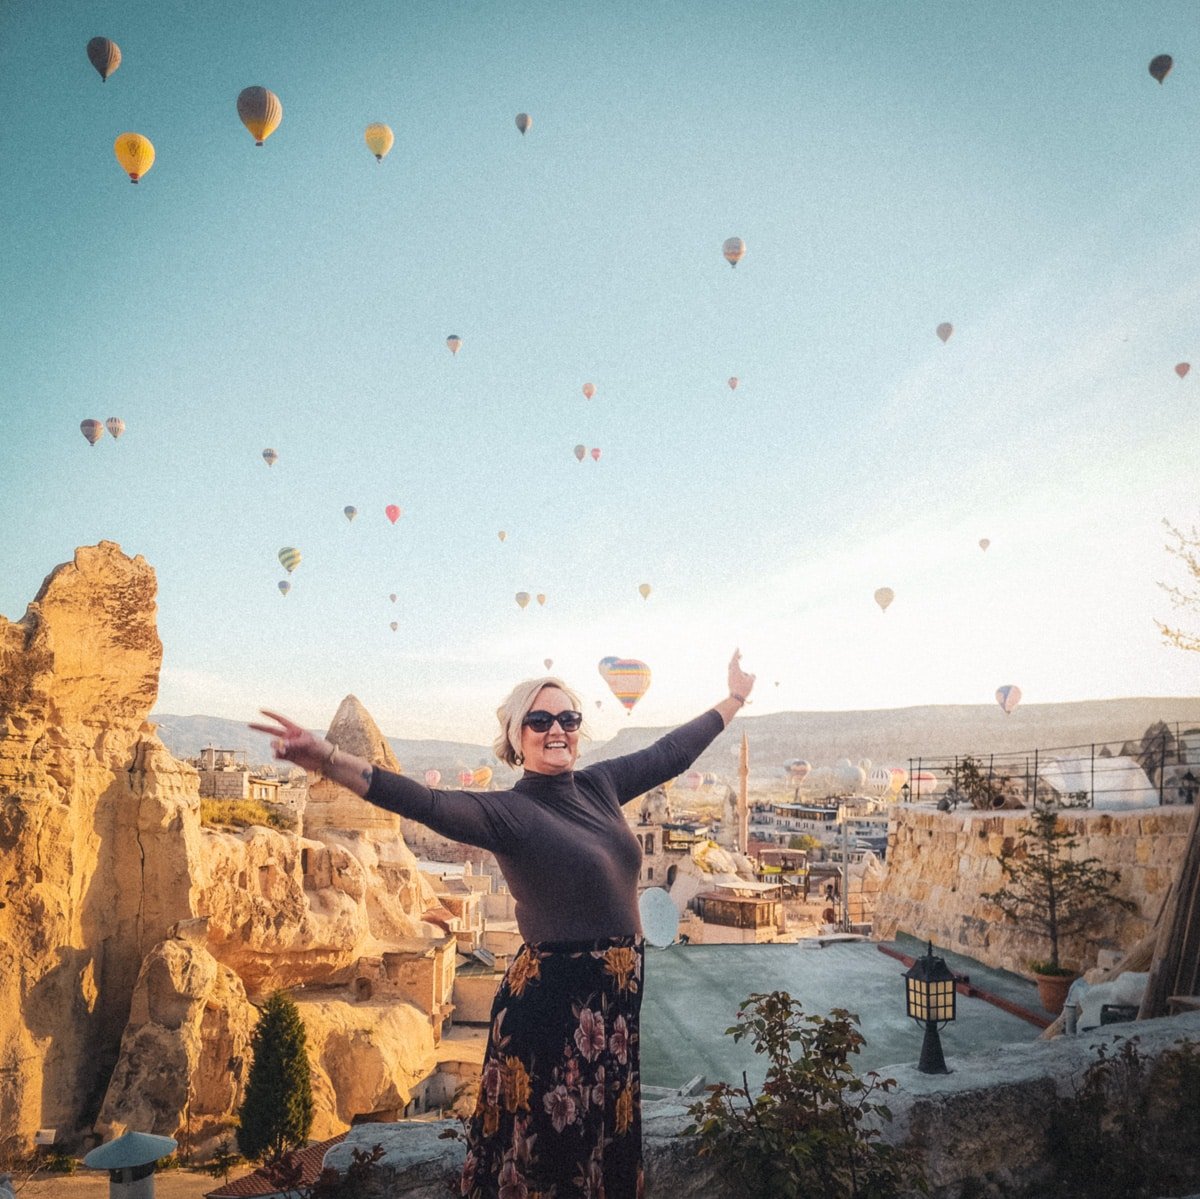 SJ with outstretched arms smiling at the camera, surrounded by colorful hot air balloons above rocky terrain under a clear sky in Cappadocia.